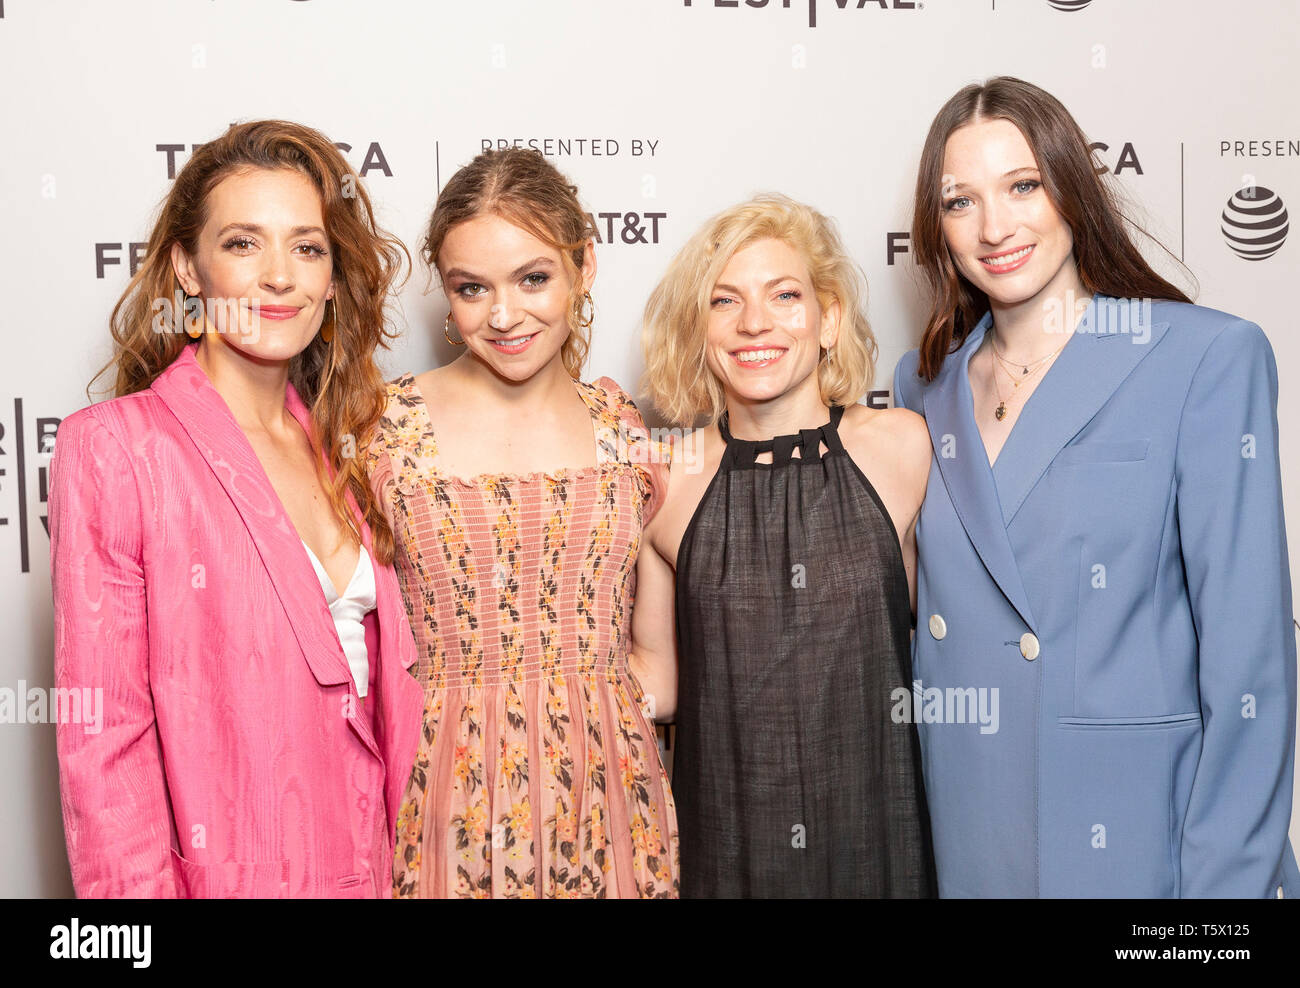 New York, United States. 26th Apr, 2019. Danielle Krudy, Morgan Saylor, Bridget Savage Cole, Sophie Lowe attend the Blow The Man Down screening at Tribeca Film Festival at SVA Theatre Credit: Lev Radin/Pacific Press/Alamy Live News Stock Photo